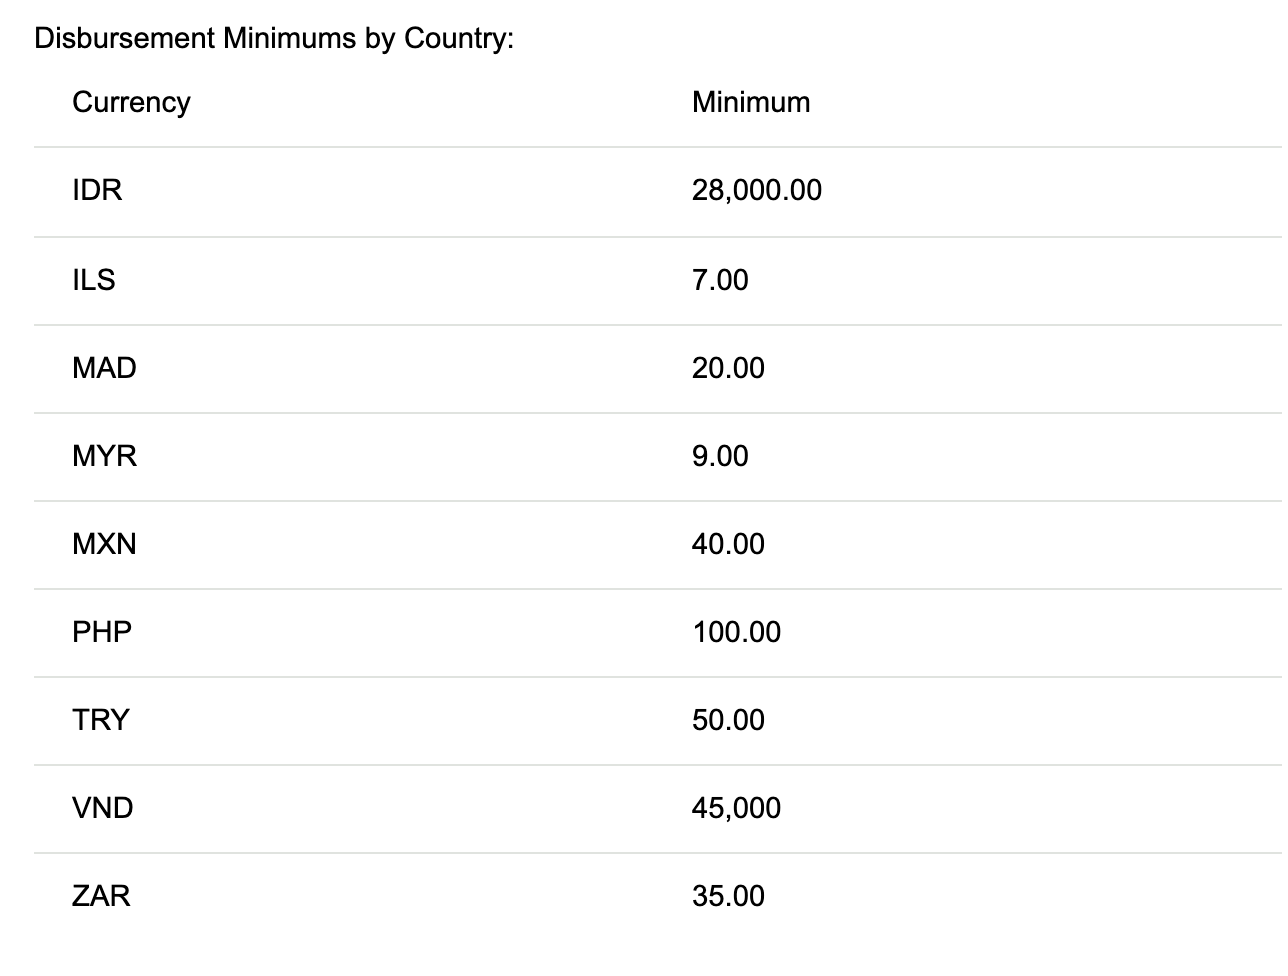 daily disbursement thresholds by currency